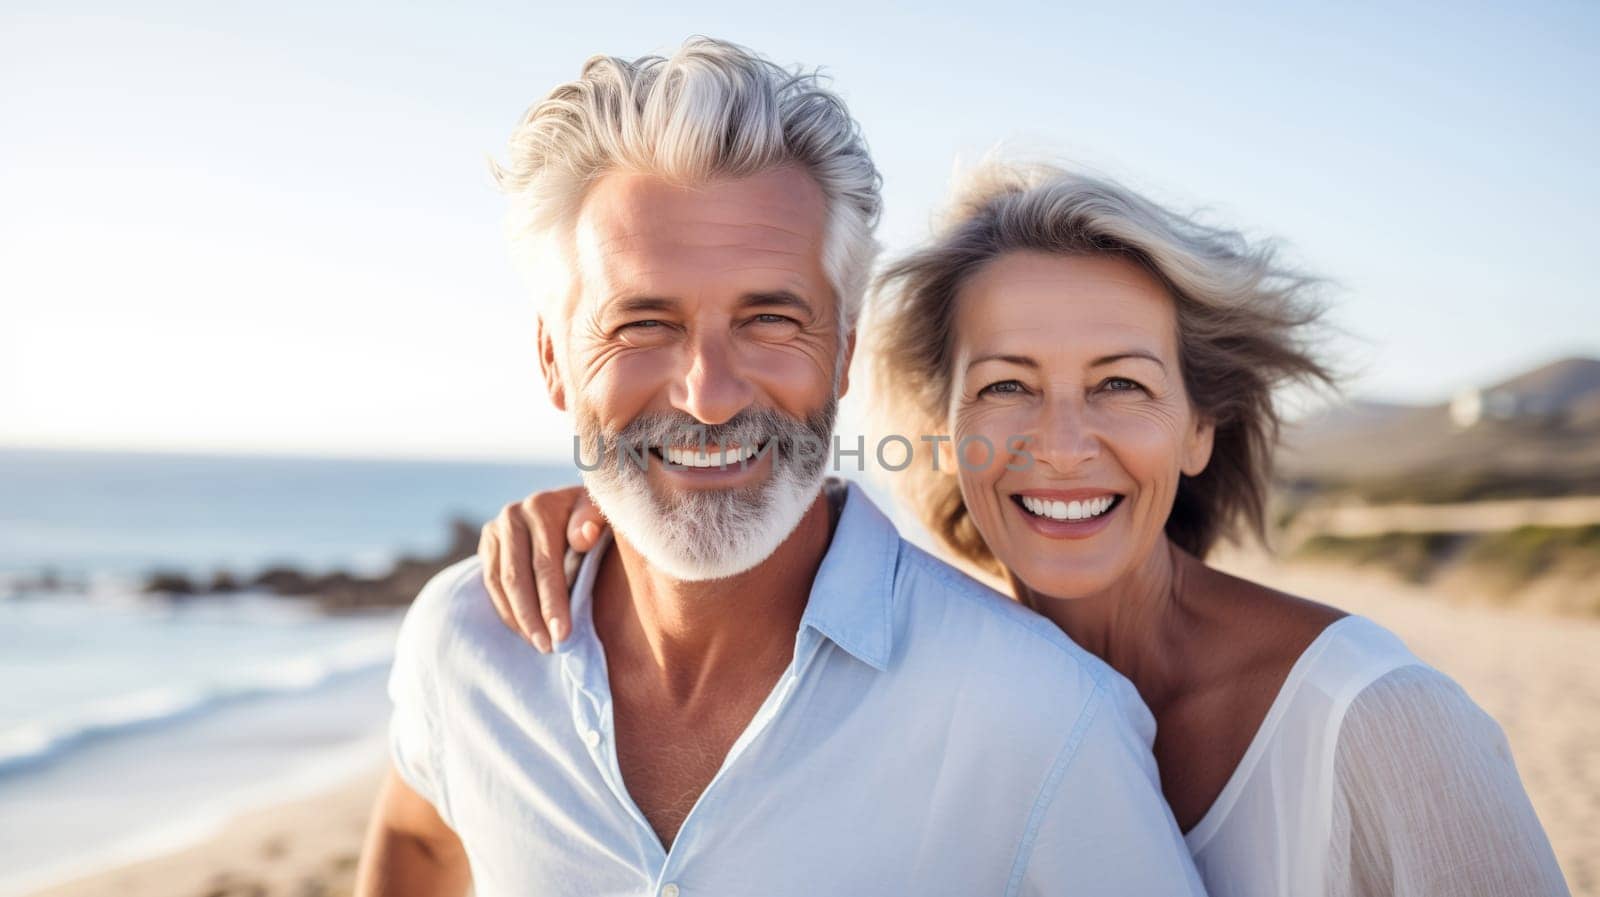 Summer portrait of happy smiling mature gray-haired couple standing together on sunny coast, woman and man enjoying beach vacation at sea